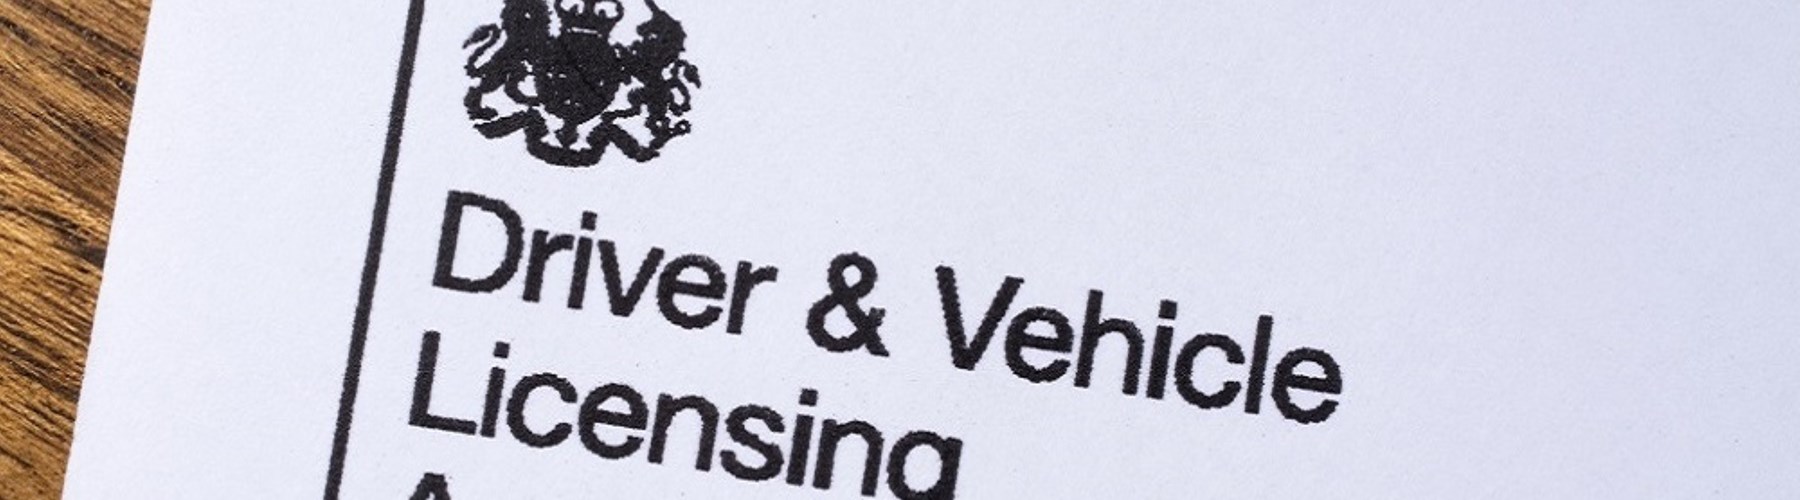 The header of a letter from the DVLA